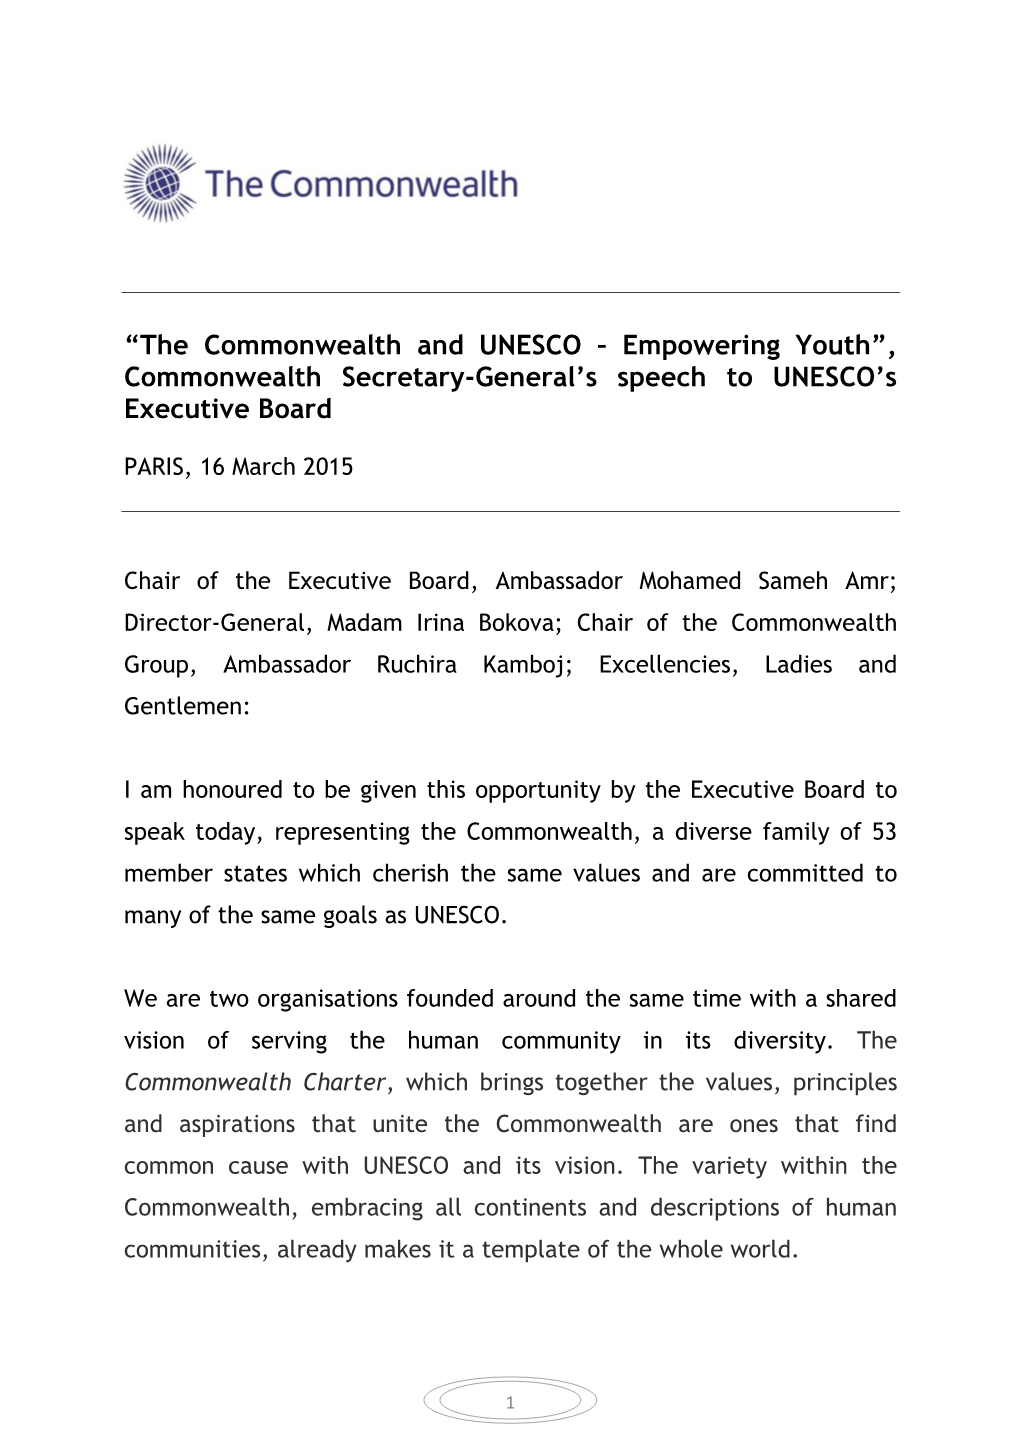 “The Commonwealth and UNESCO – Empowering Youth”, Commonwealth Secretary-General's Speech to UNESCO's Executive Board